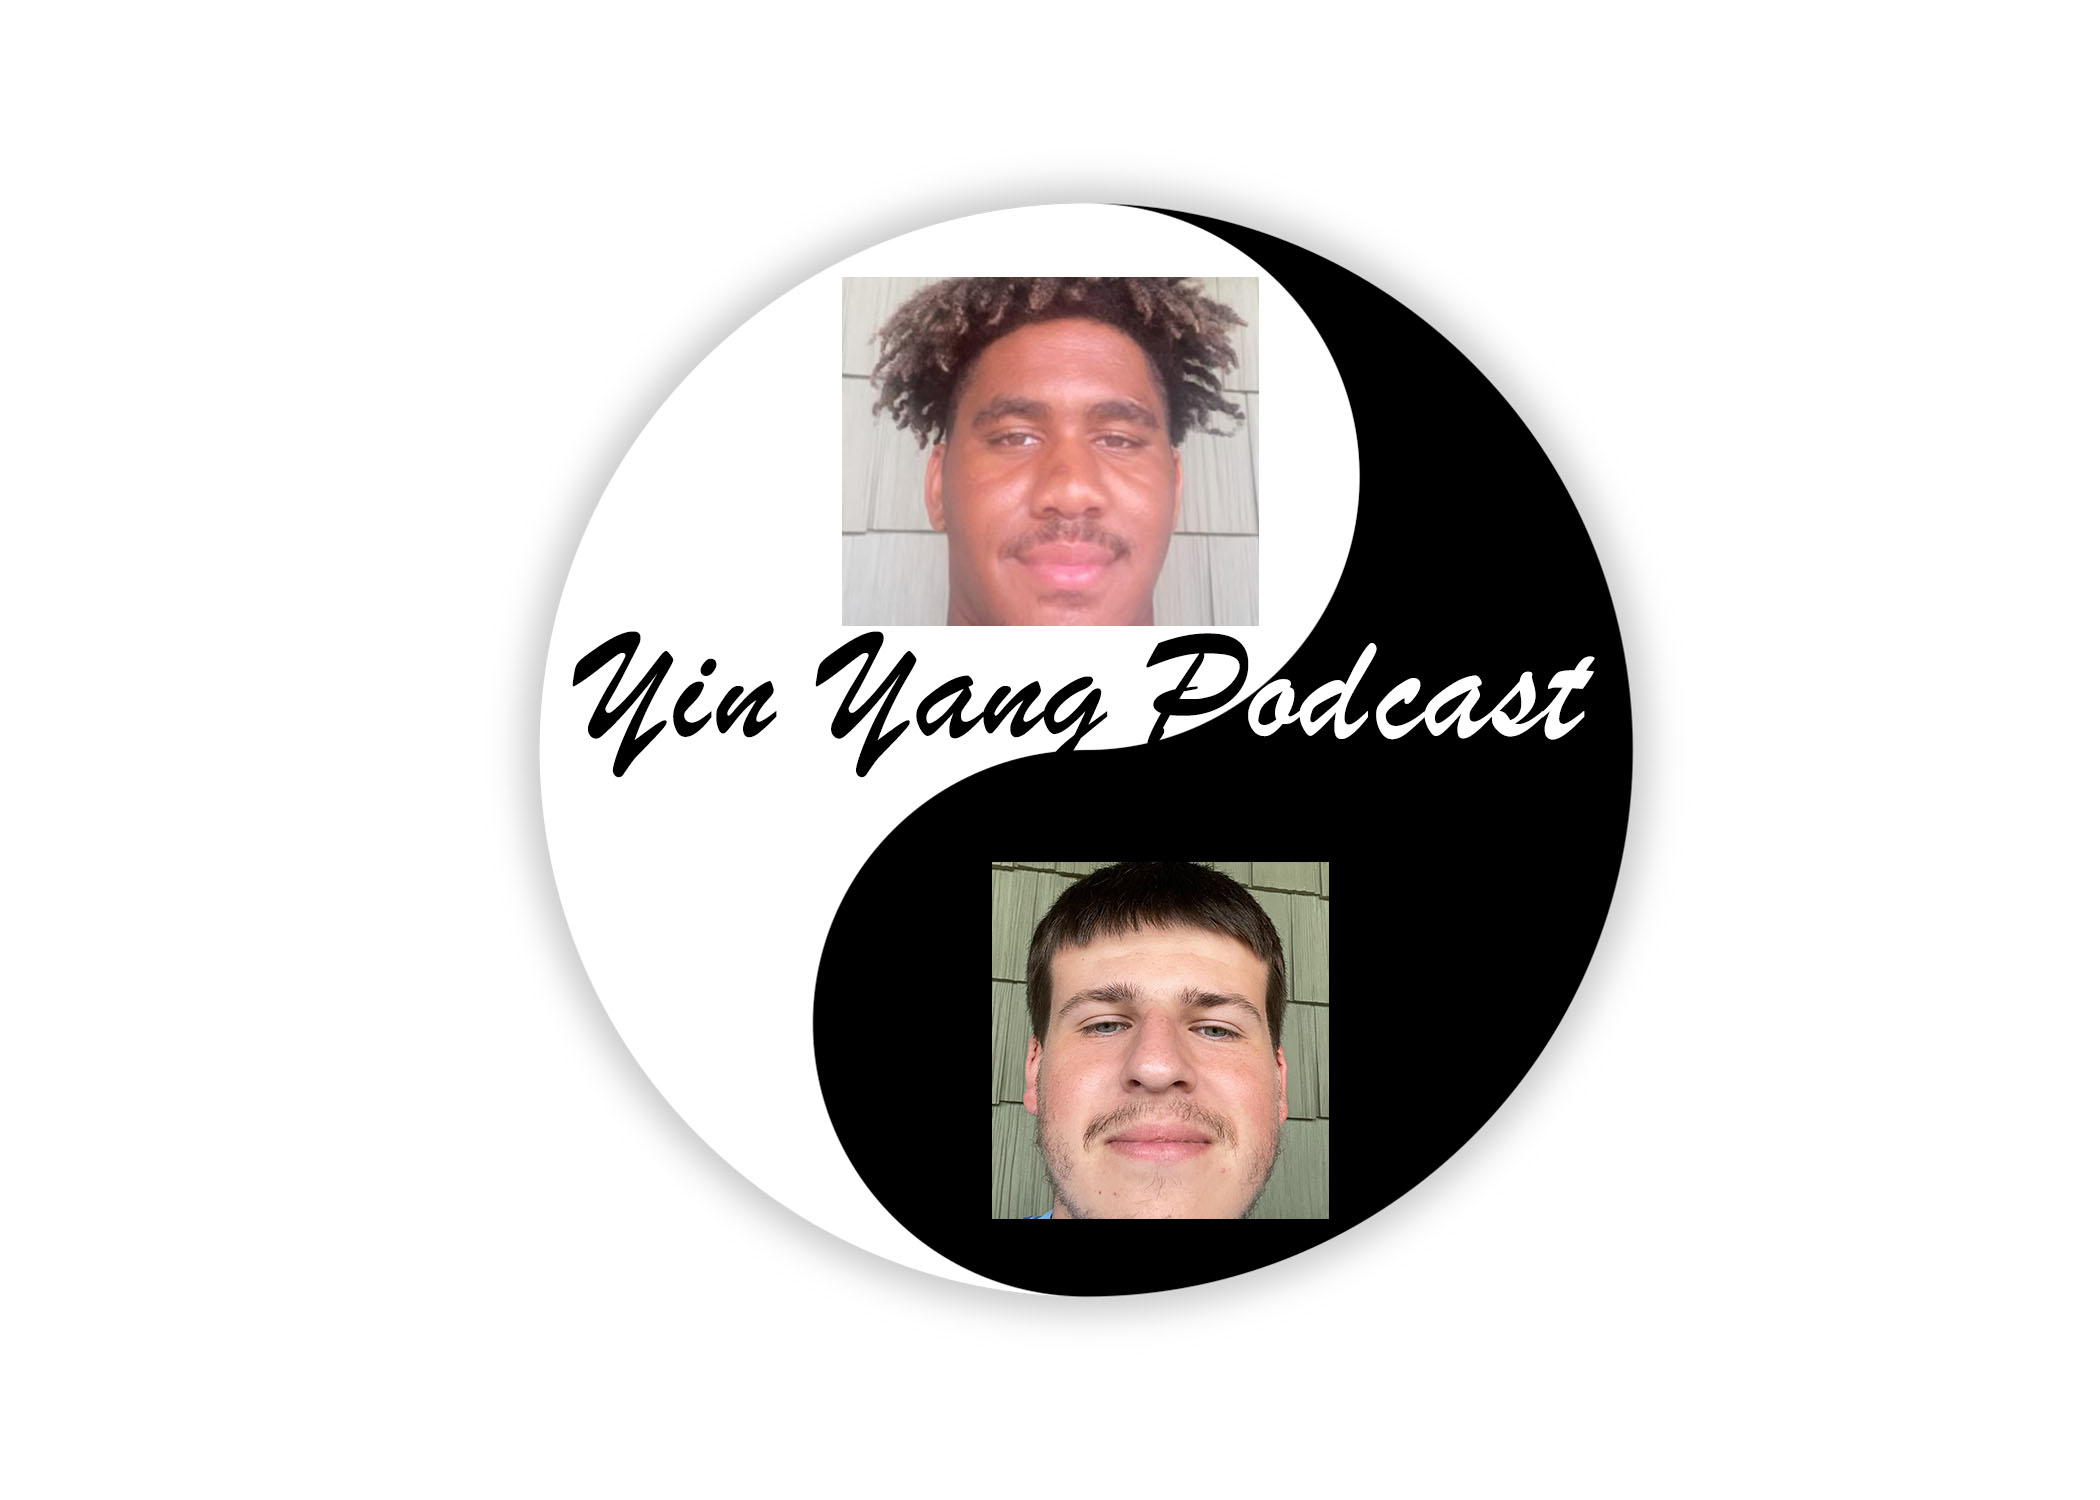 The Yin Yang Podcast